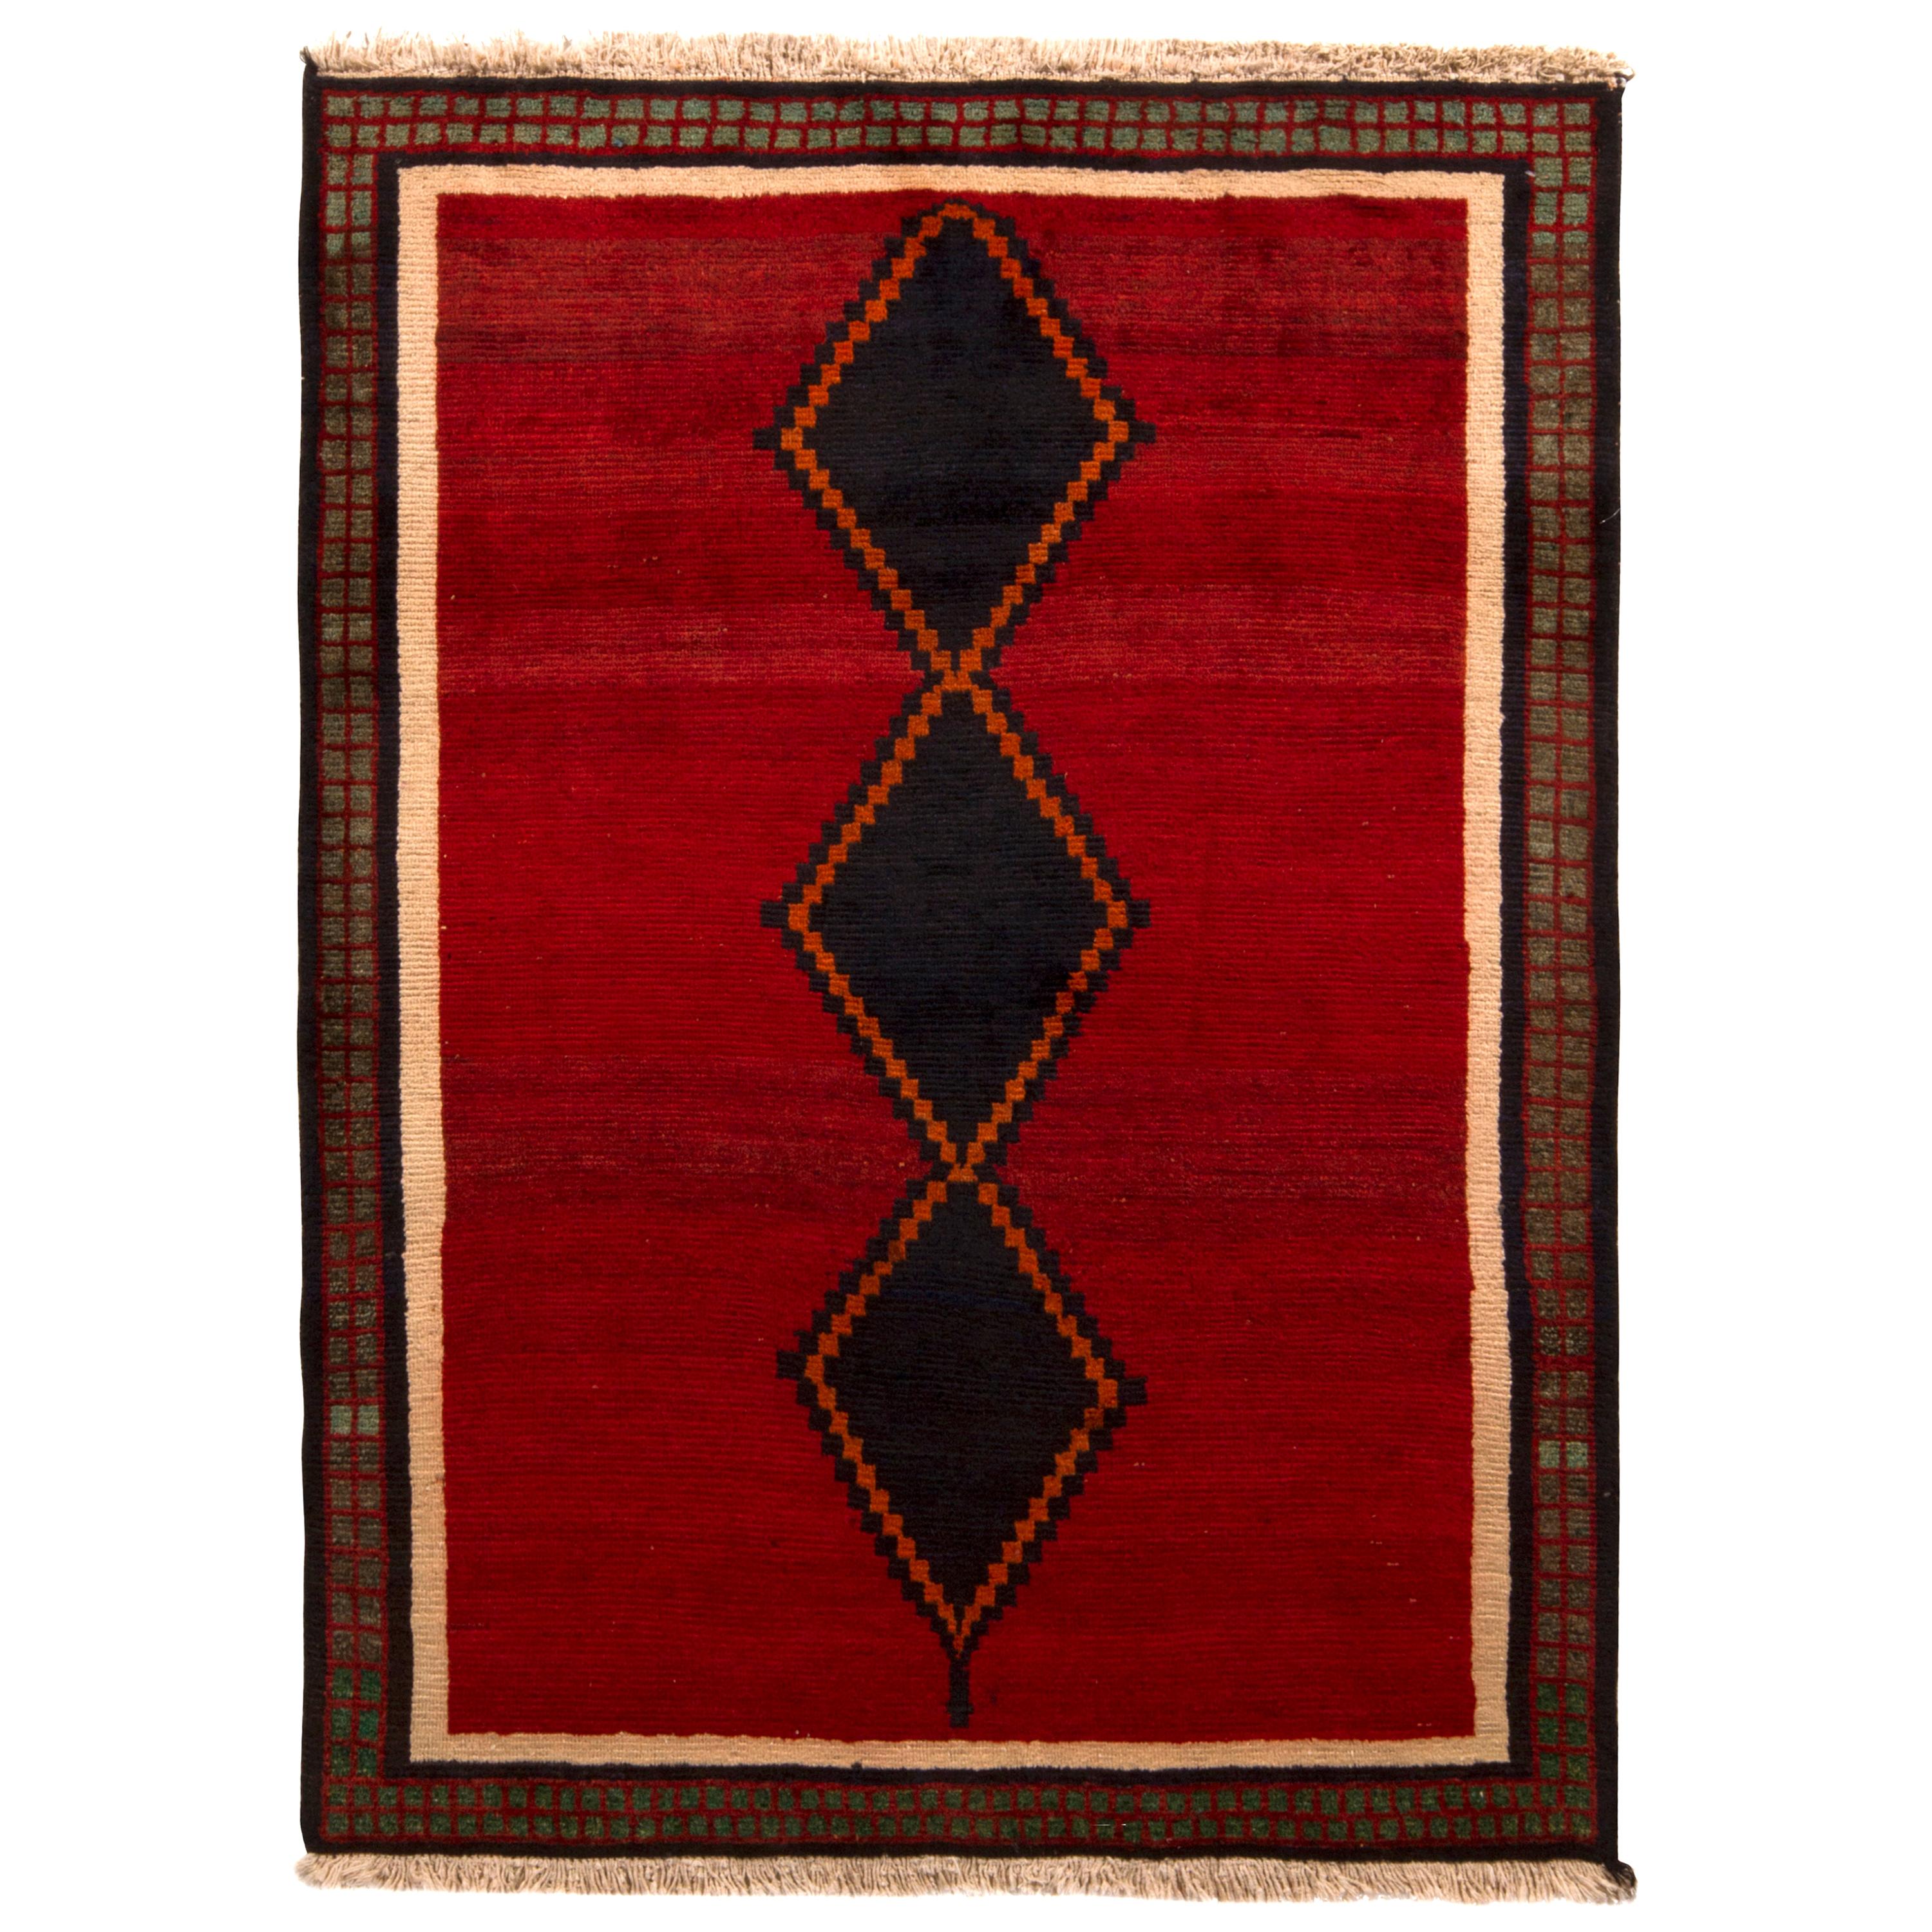 Hand Knotted Antique Gabbeh Rug Red Beige Green with Black Diamond Pattern